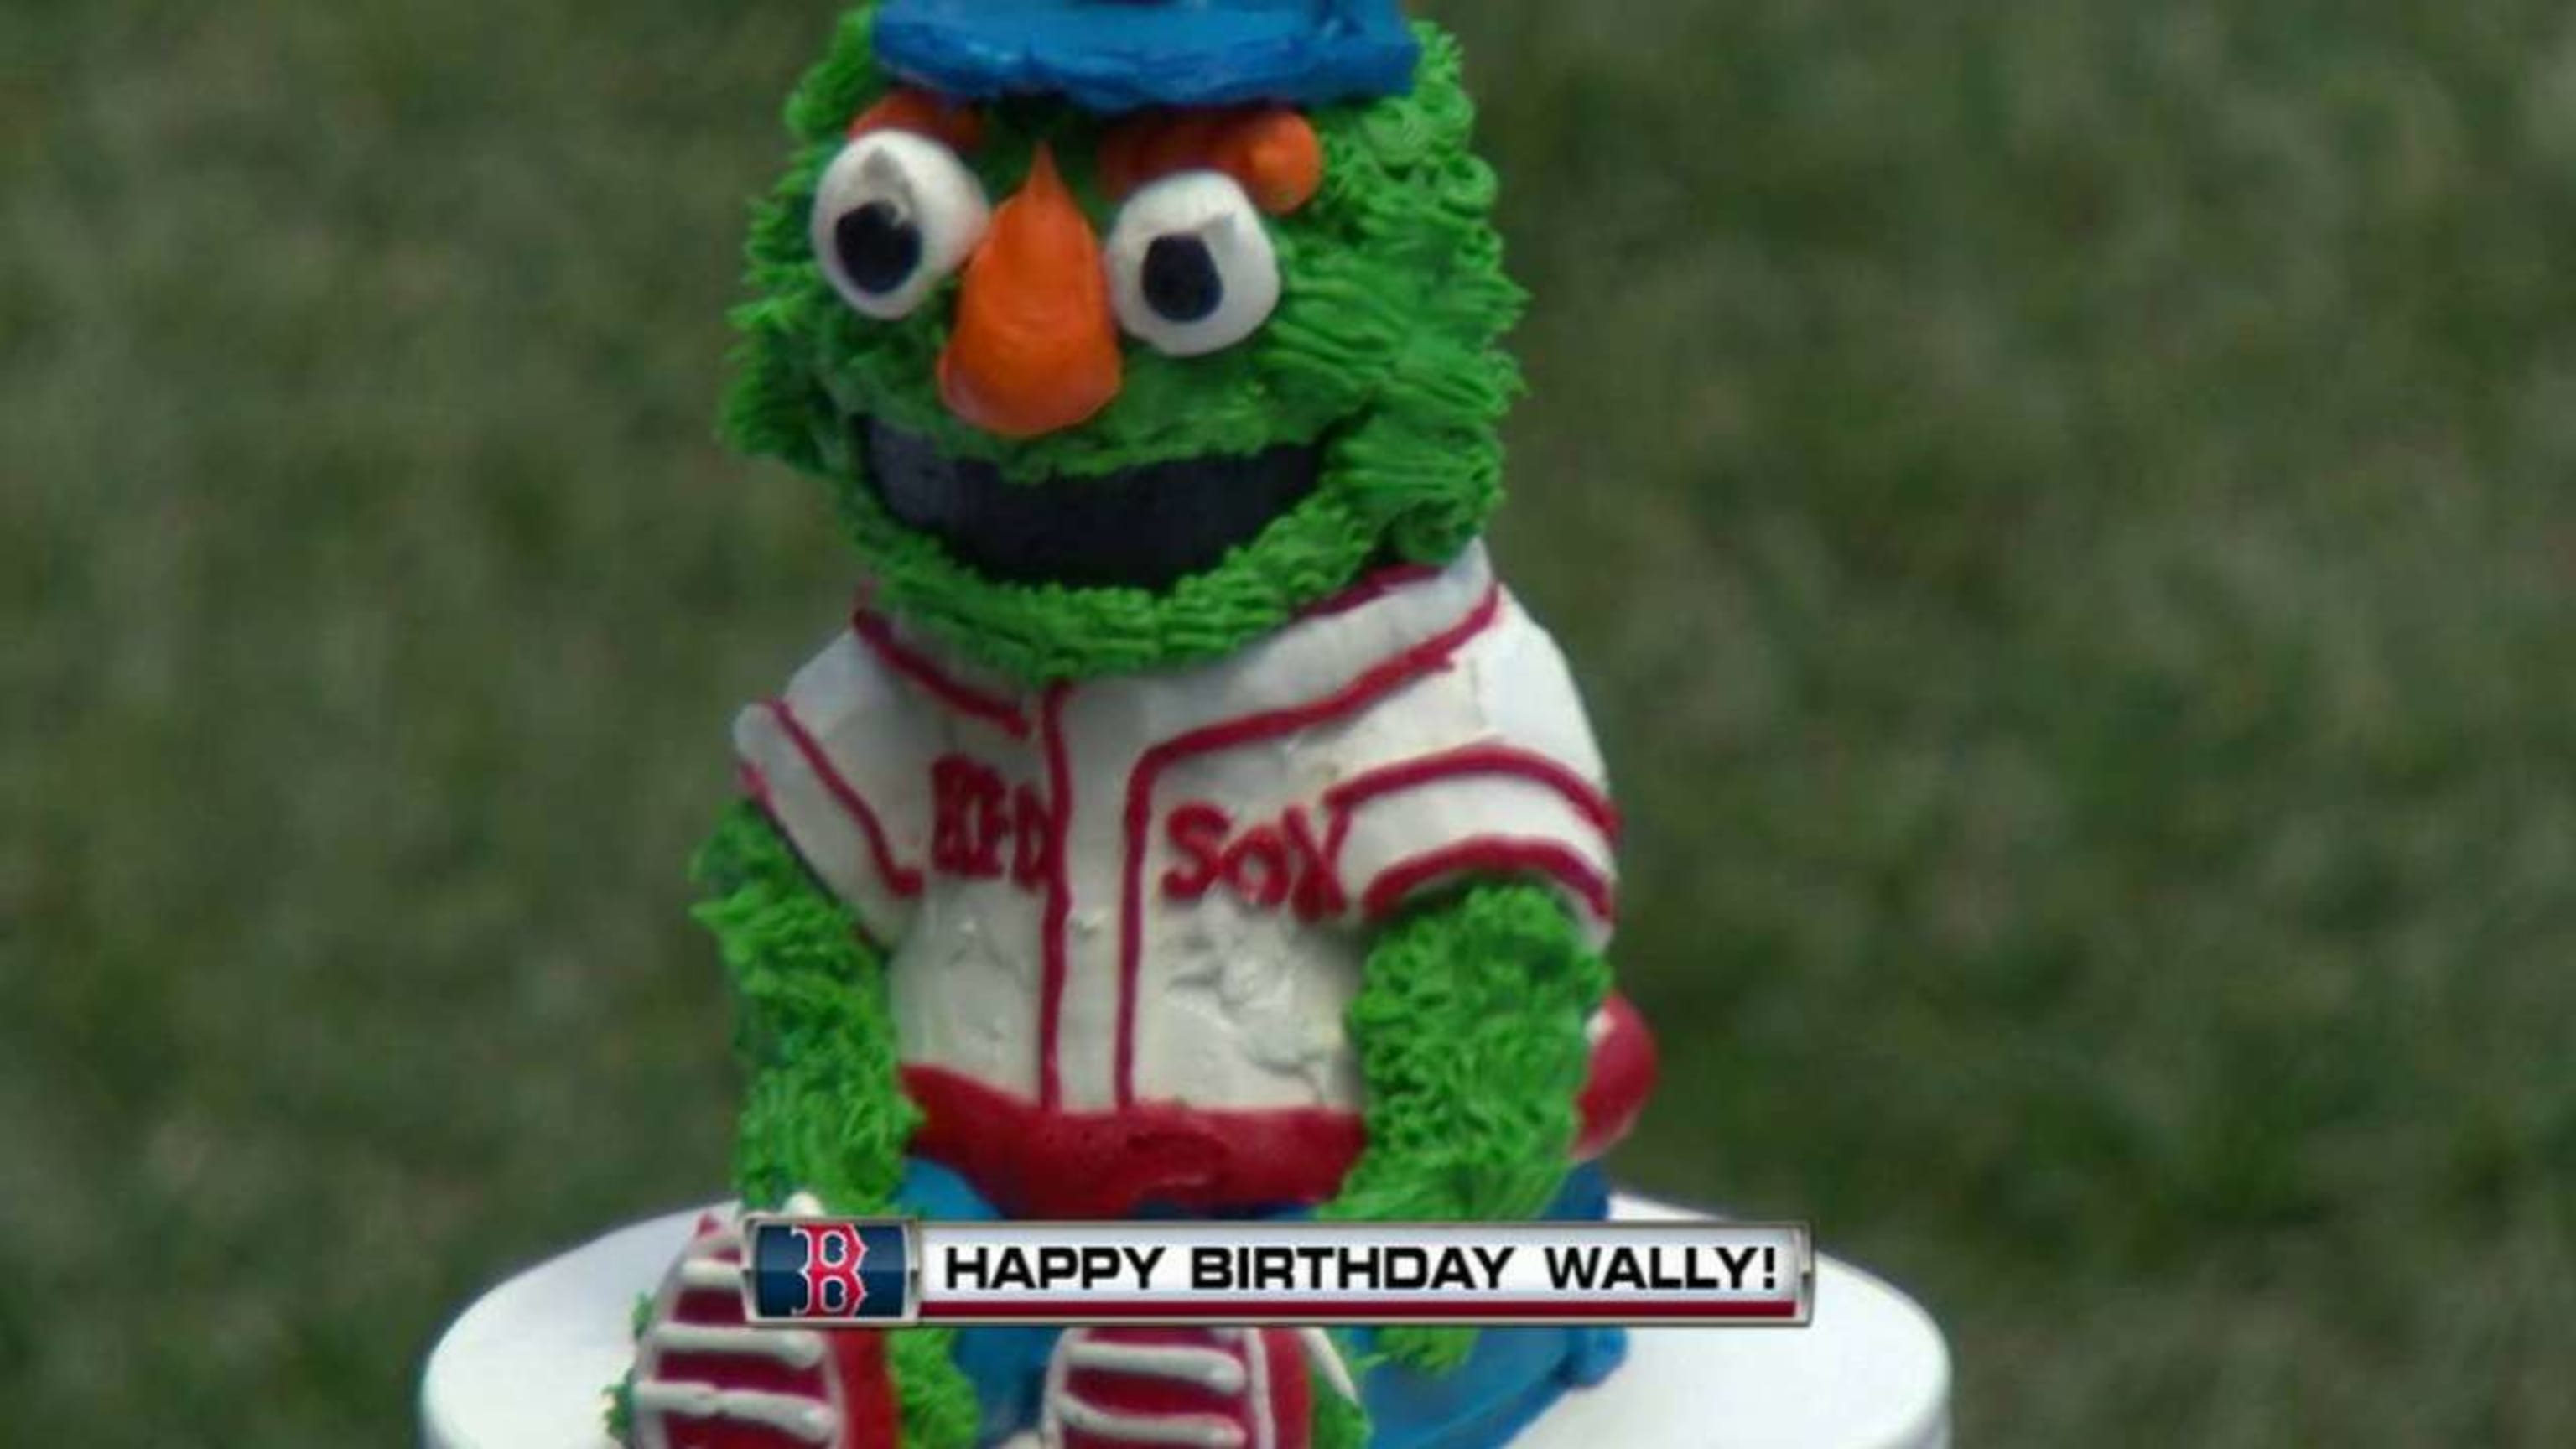 Red Sox throw Wally a marvelous, star-studded mascot party for his birthday